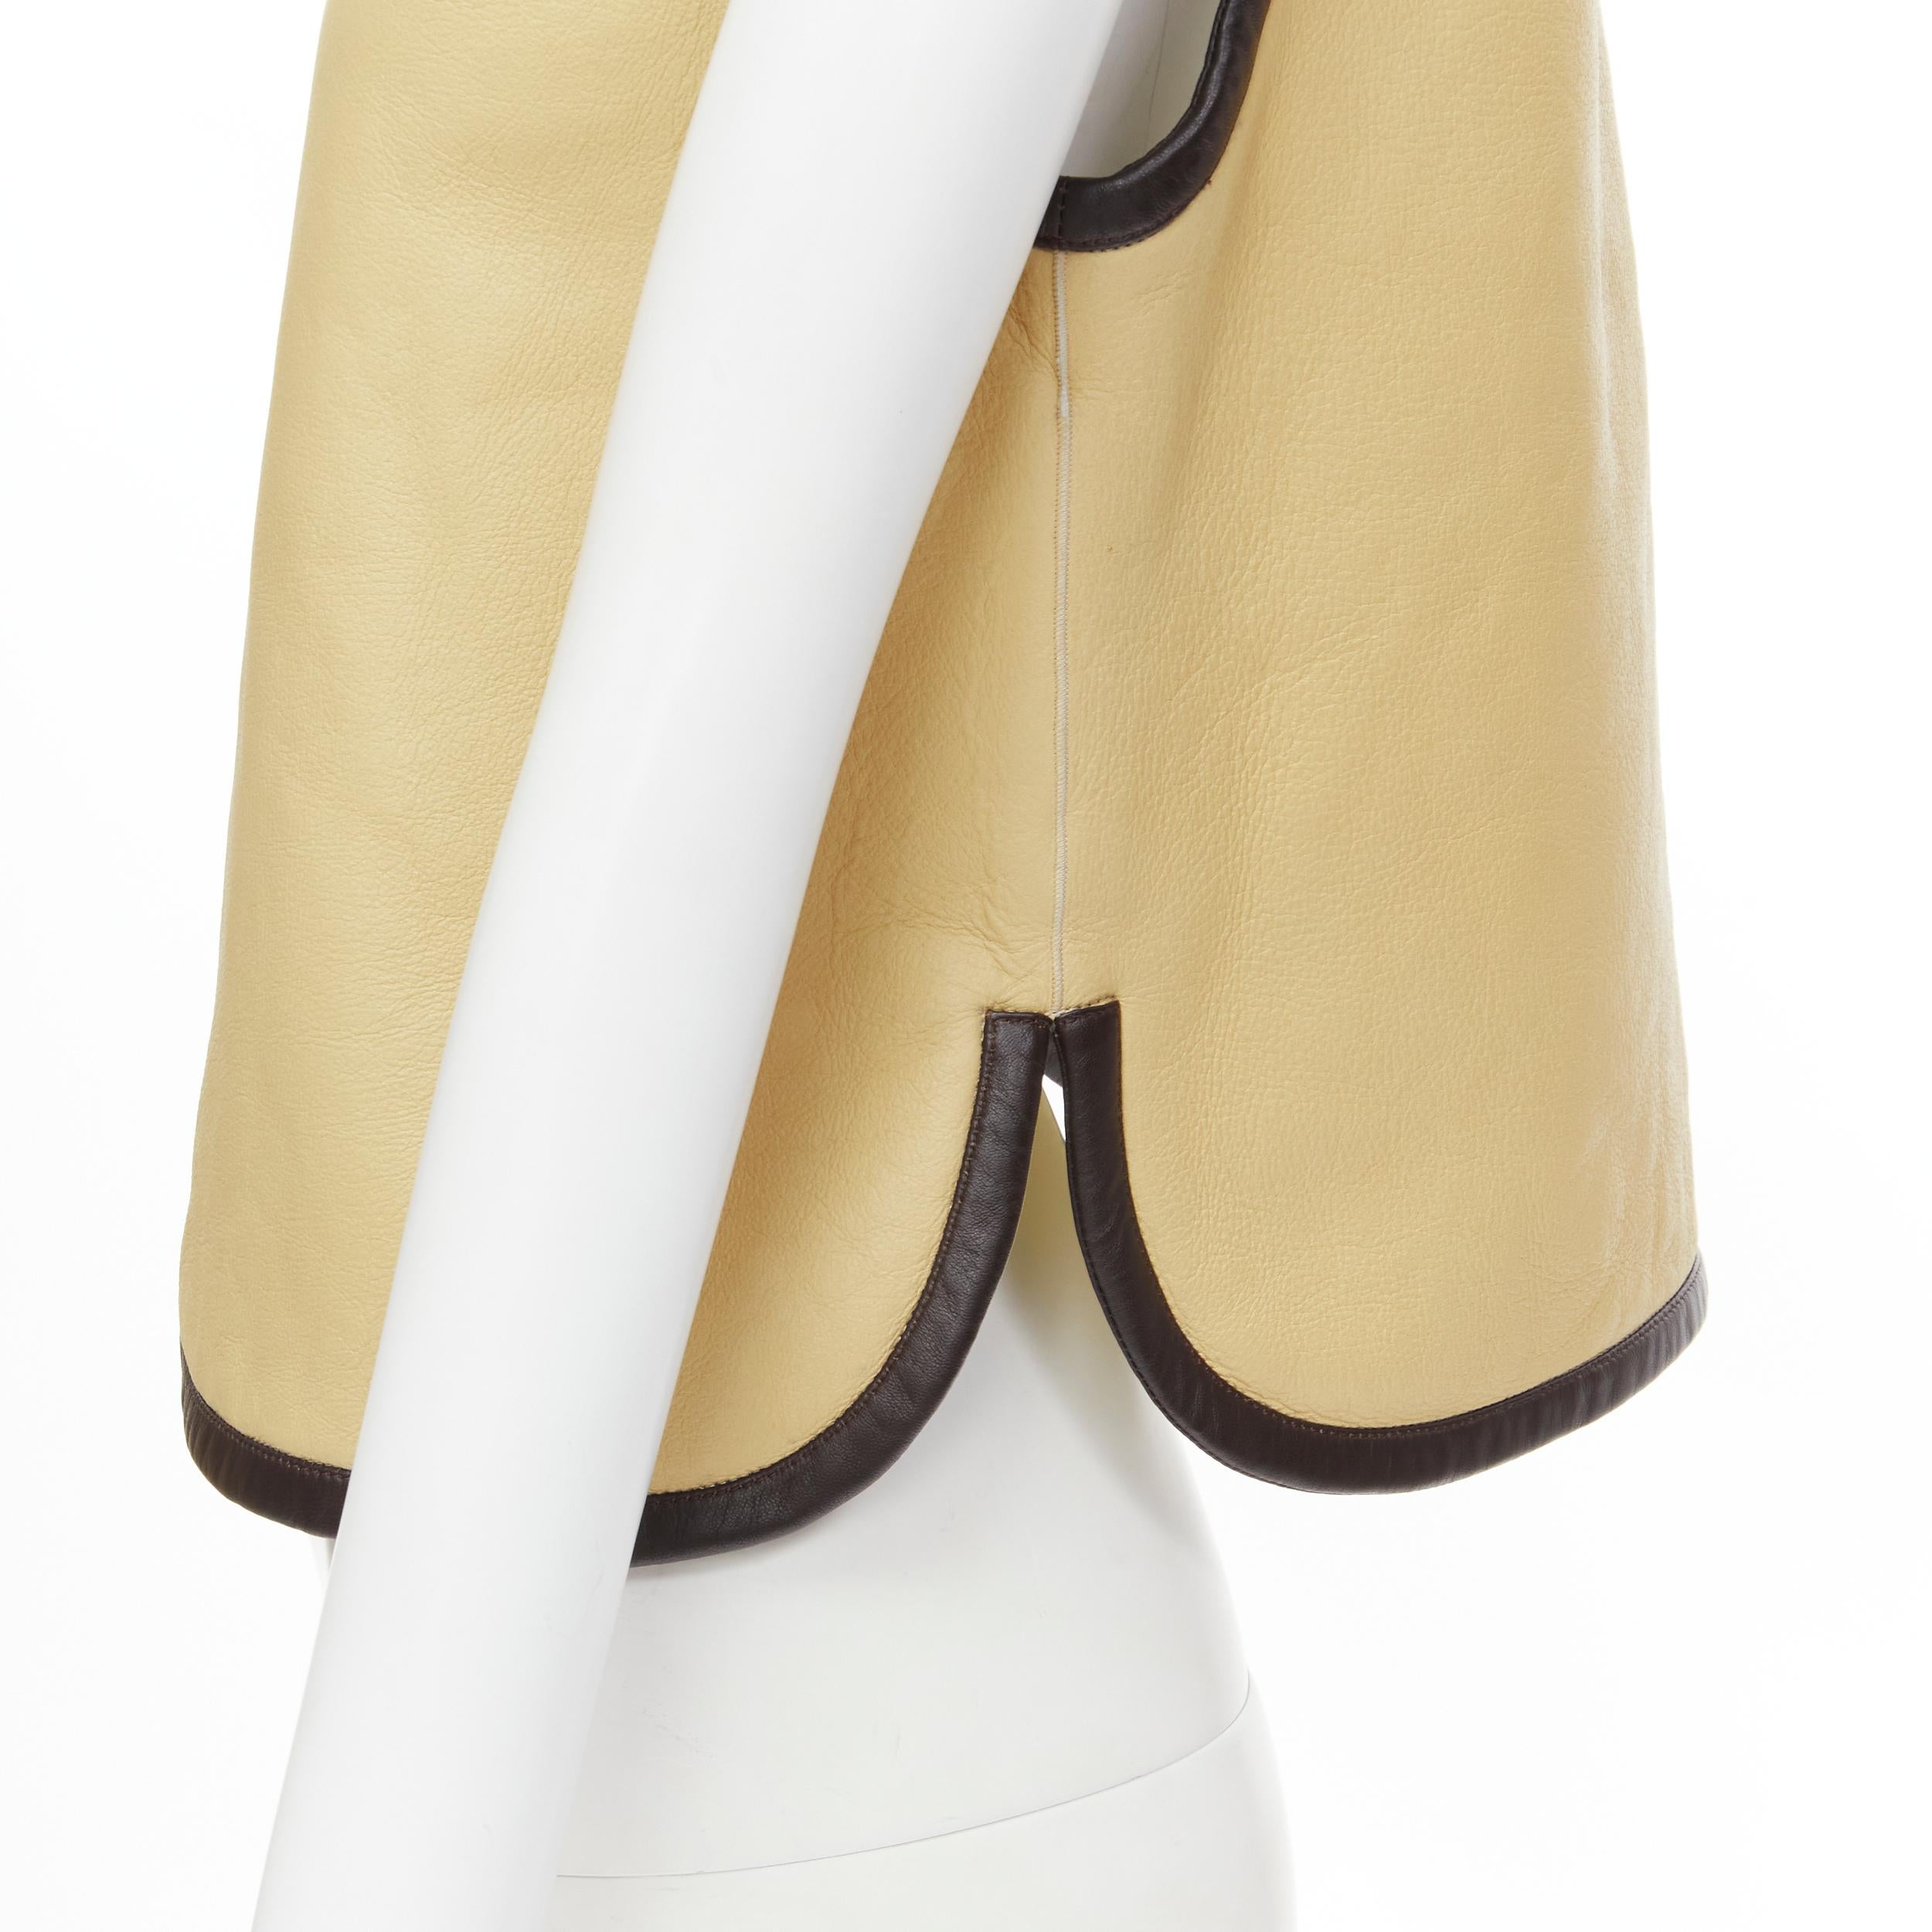 CHLOE beige brown leather colorblocked shearling lined zip vest FR34 XS 
Reference: MELK/A00142 
Brand: Chloe 
Material: Leather 
Color: Brown 
Pattern: Solid 
Closure: Zip 
Extra Detail: Full shearling lined. Chloe signed zipper. 
Made in: Italy